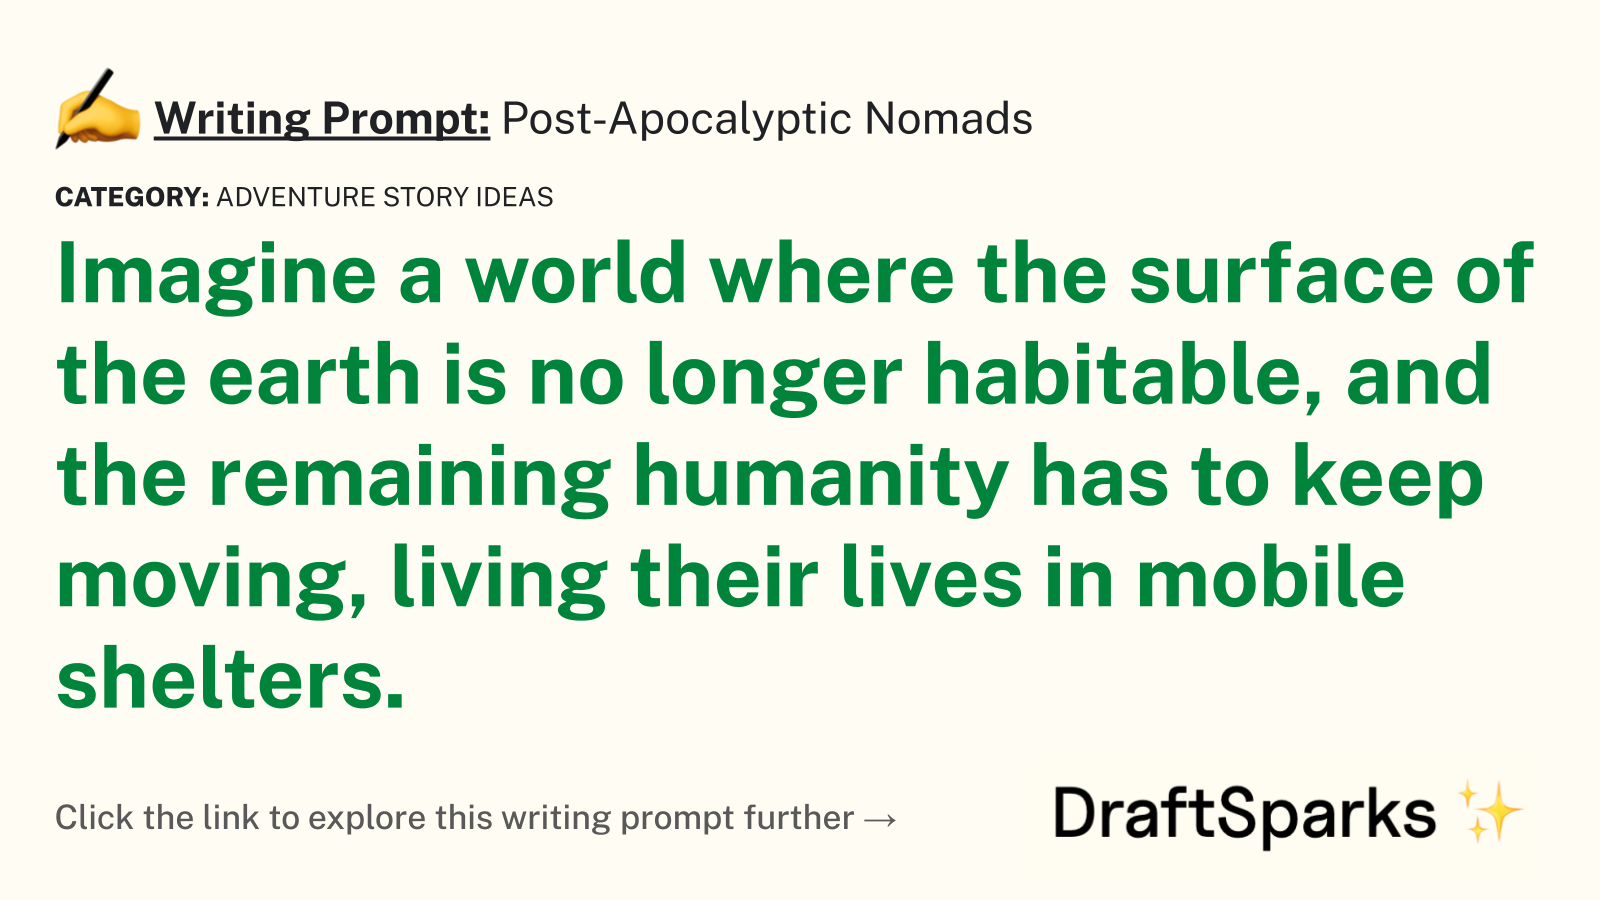 Post-Apocalyptic Nomads